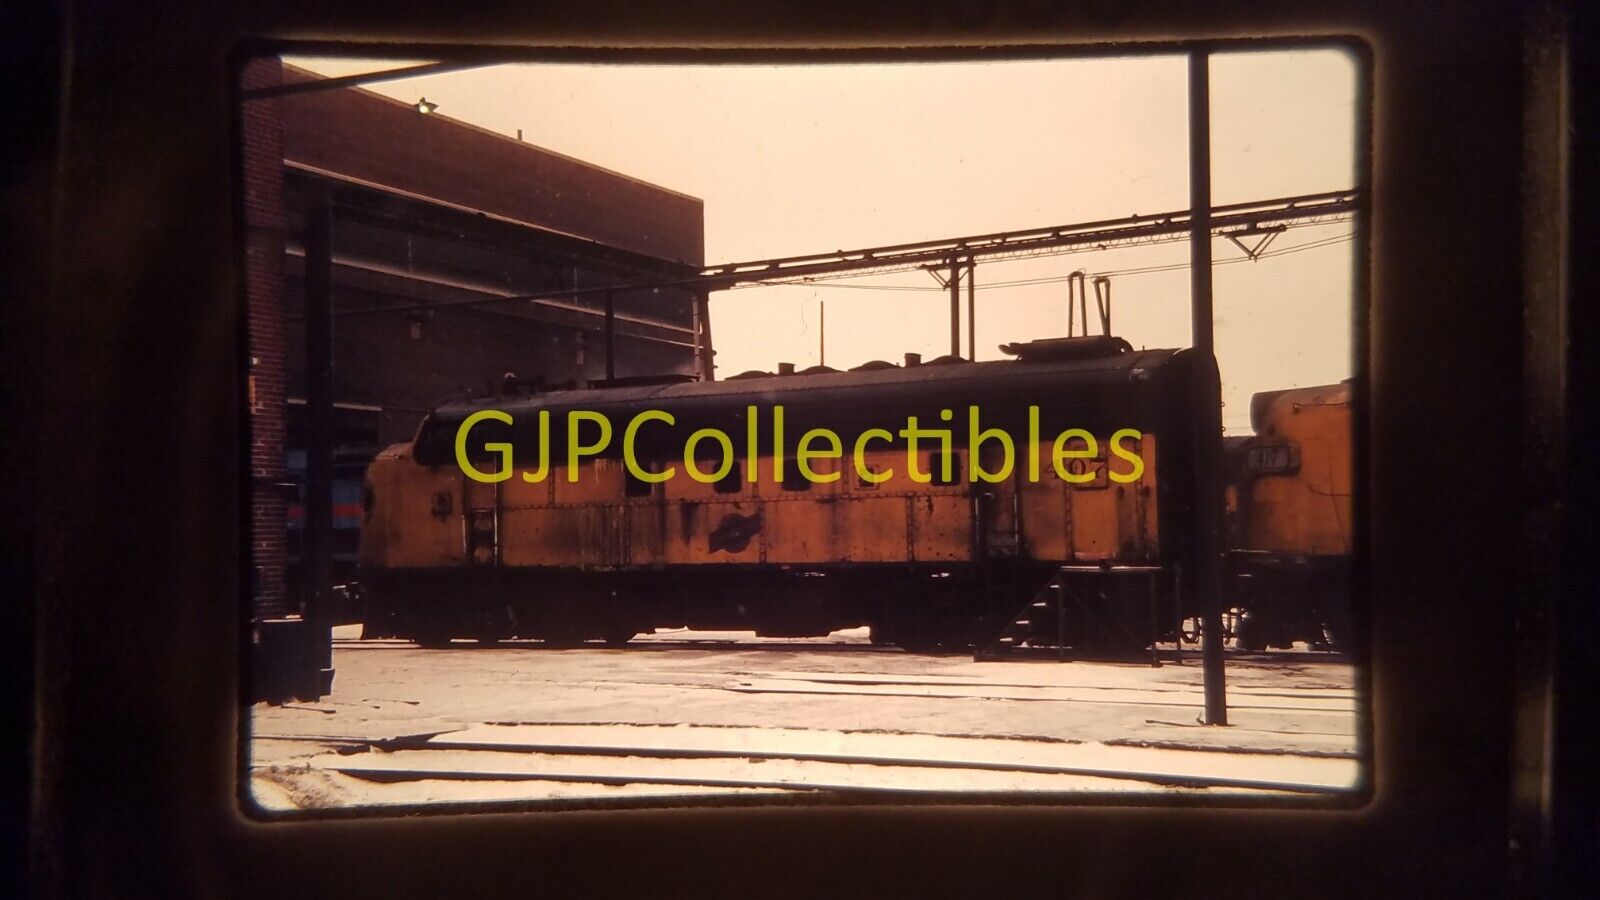 22212 35MM Train Slide ENGINES CARS STATIONS C & NW 407 F7A CHICAGO IL DEC 26 80